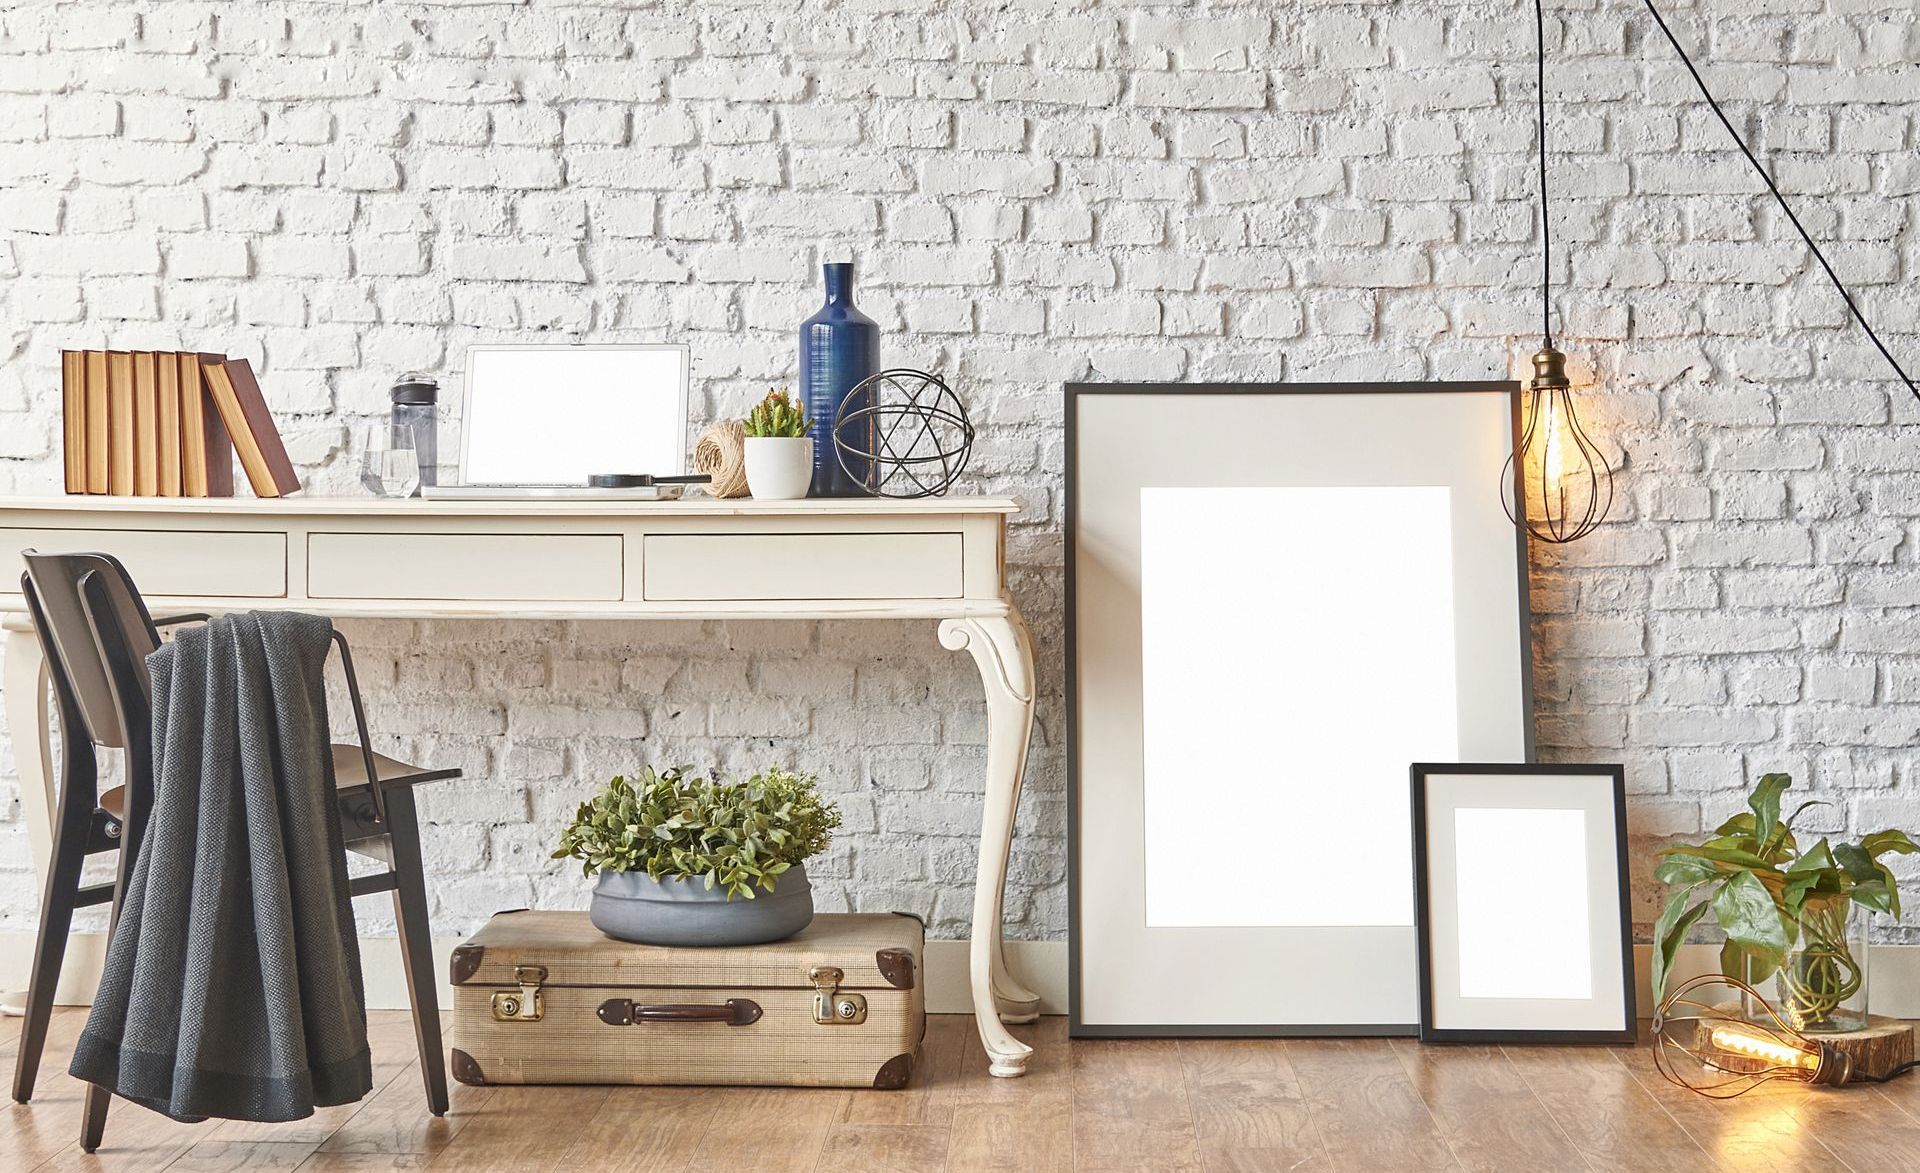 a white brick wall behind a vintage desk with a laptop on it with vintage inspired decor pieces